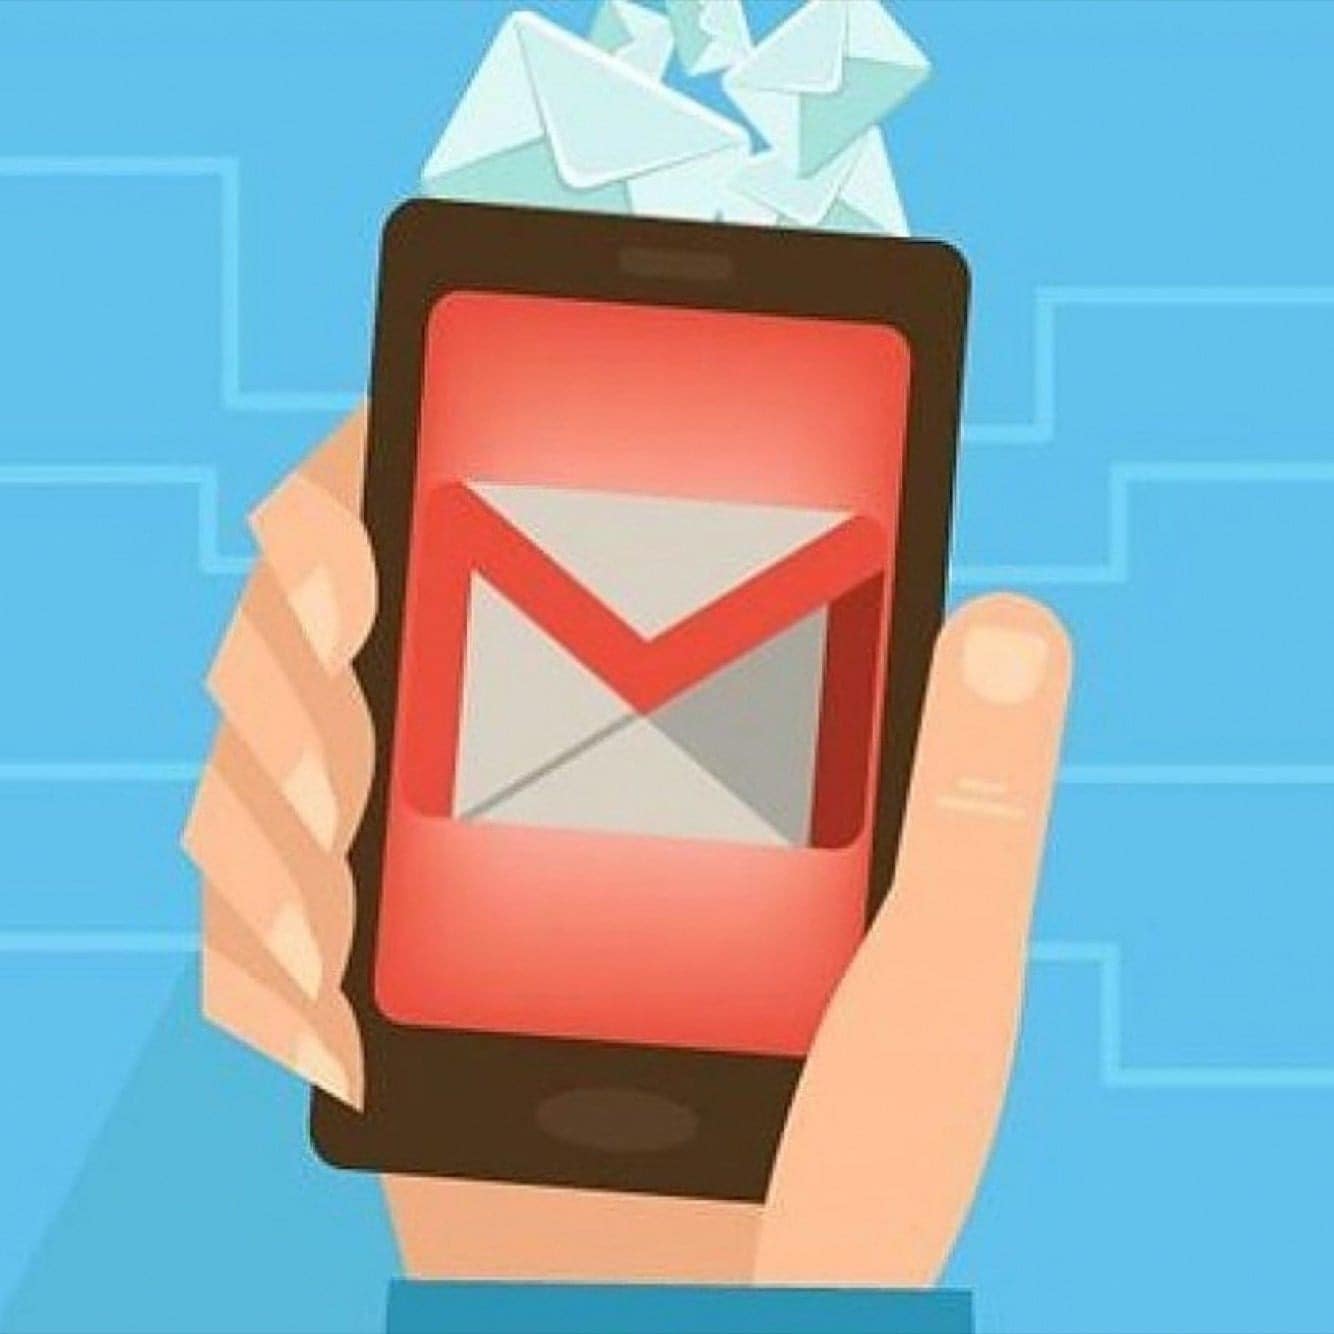 manage emails in gmail